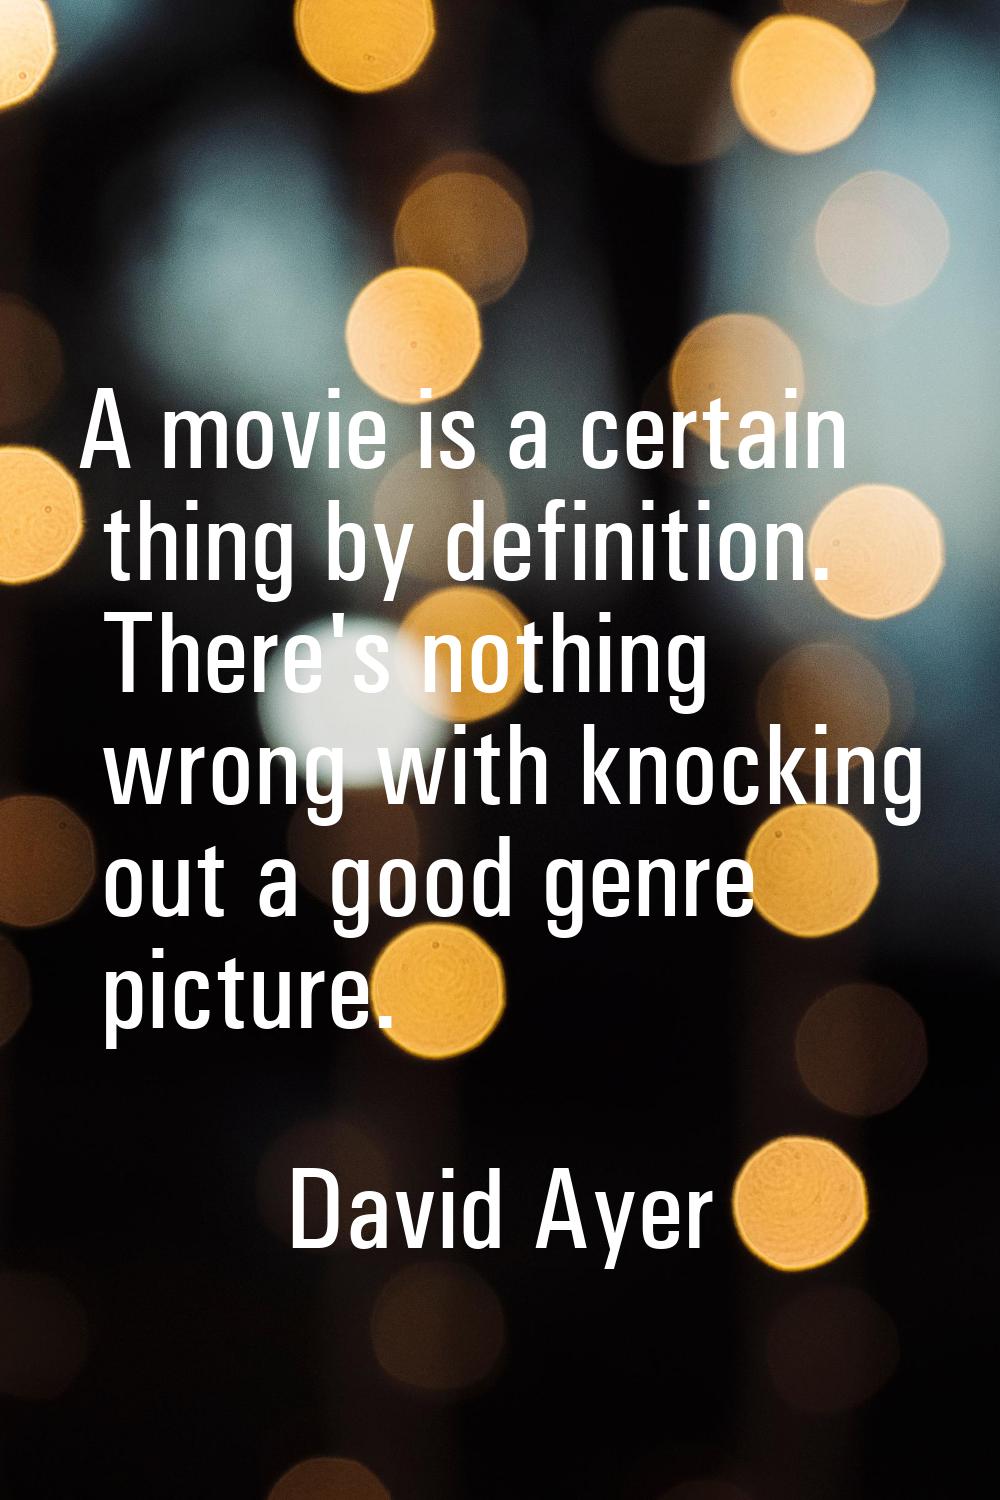 A movie is a certain thing by definition. There's nothing wrong with knocking out a good genre pict